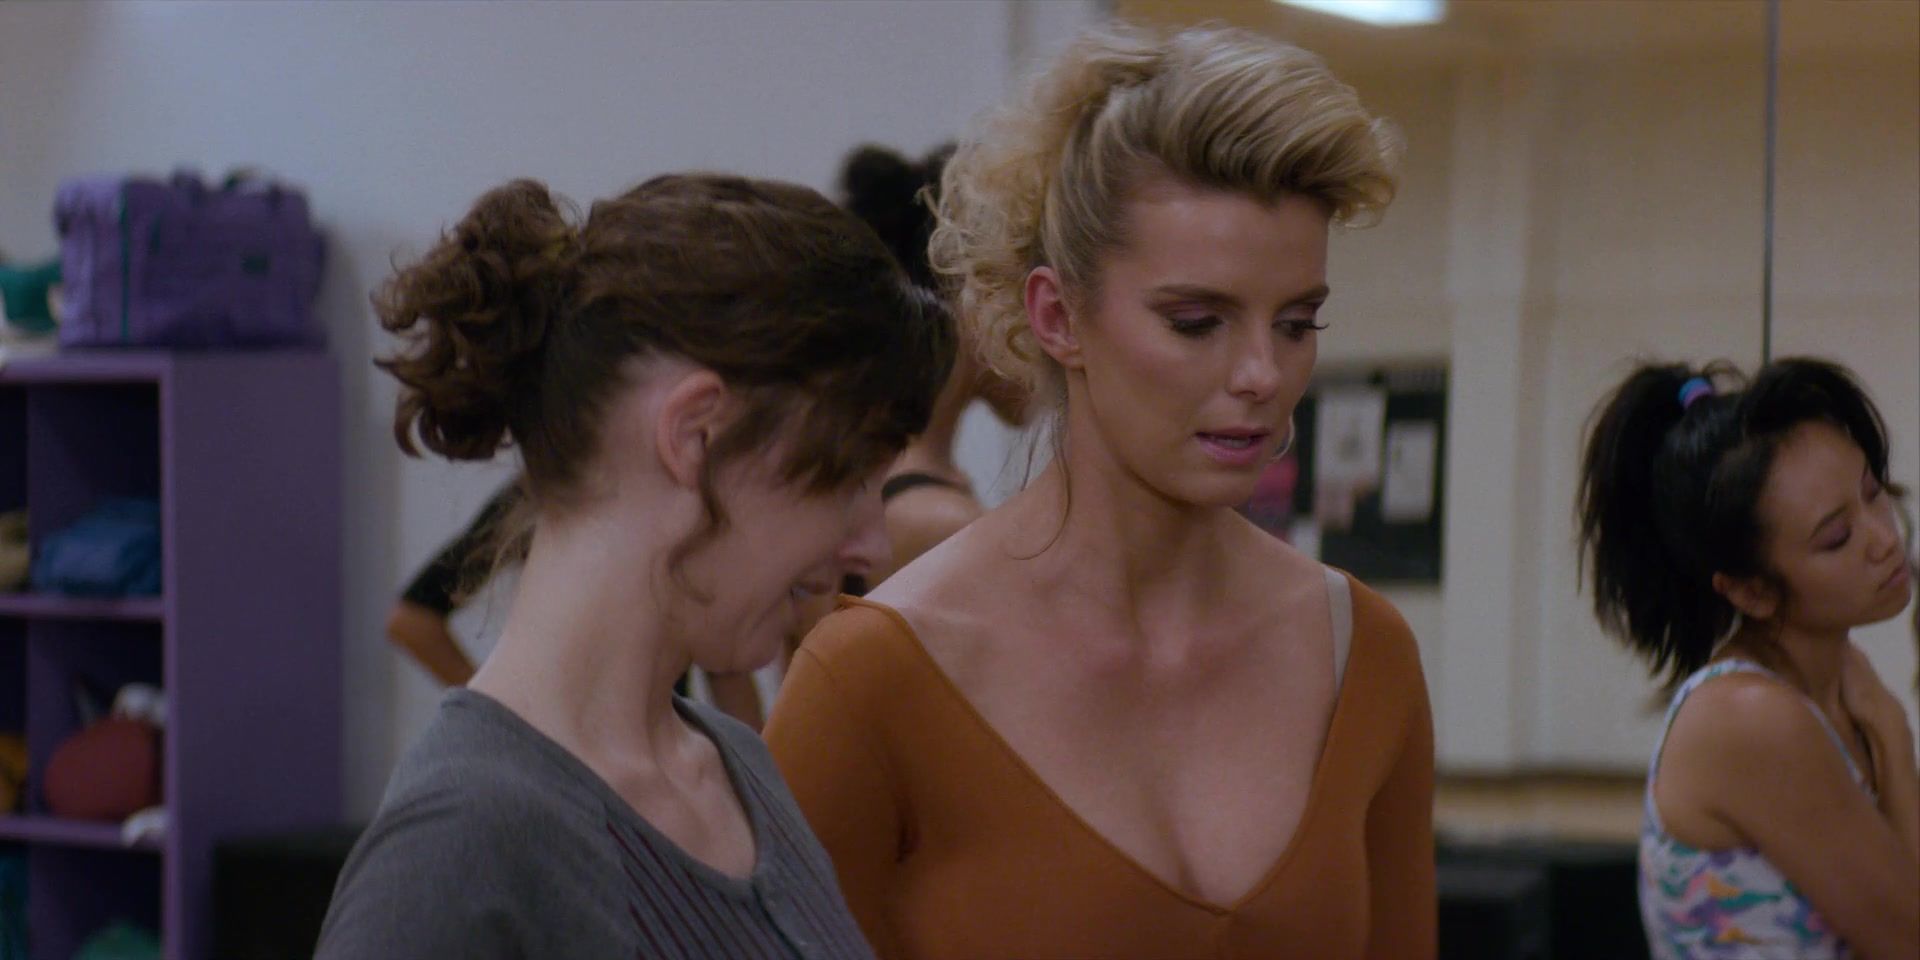 Toes Alison Brie, Betty Gilpin, Jackie Tohn, Kate Nash nude - Glow s03e03 (2019) Gay